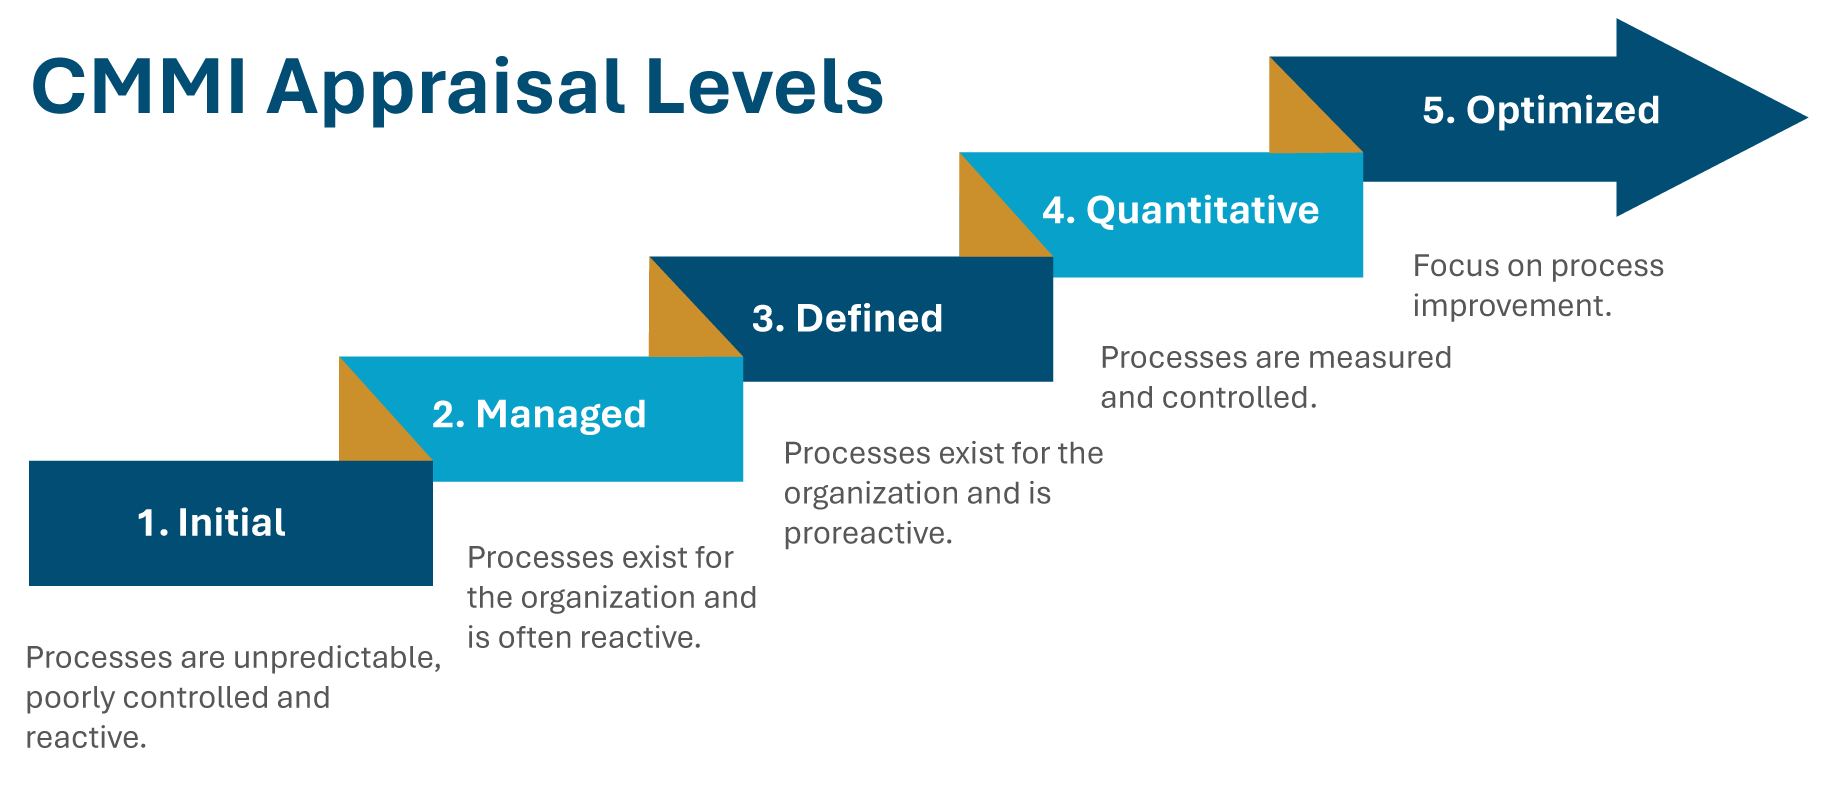 dynamic 5-stage arrow chart numerical showing each CMMI appraisal level from low to high. 1.Inital 2.Managed 3.Defined 4.Quantitative 5.Optimized 